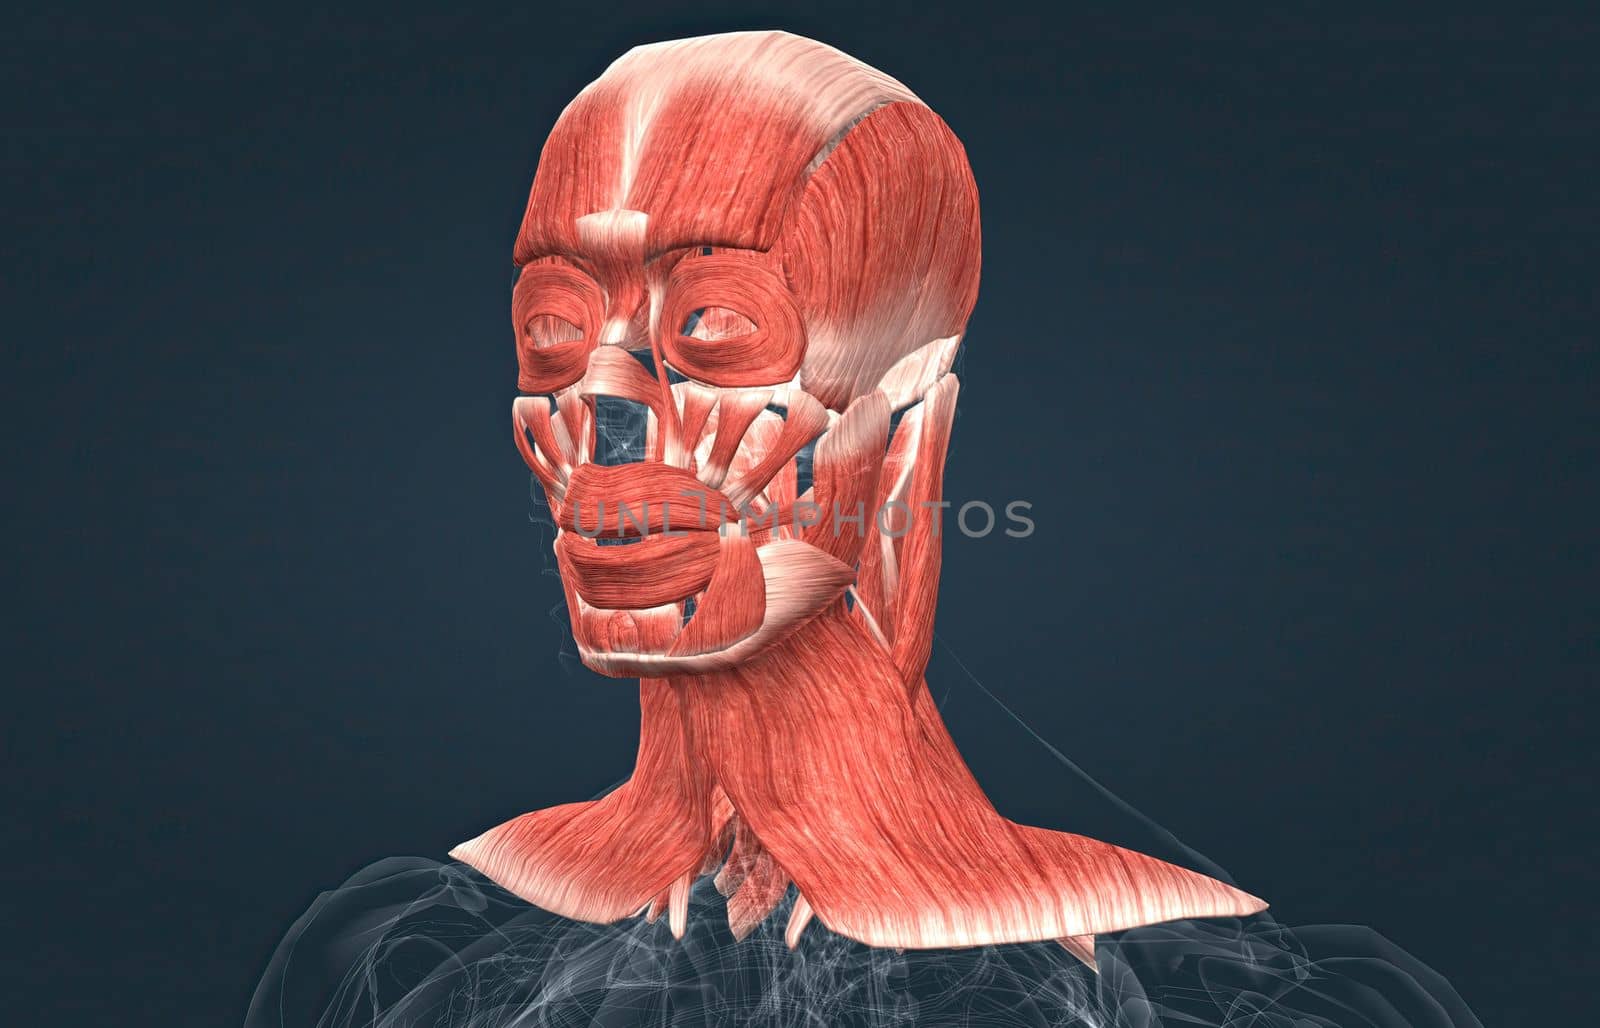 Human anatomy of a male face, neck and shoulder muscle anatomy, medical image of human anatomy 3D illustration